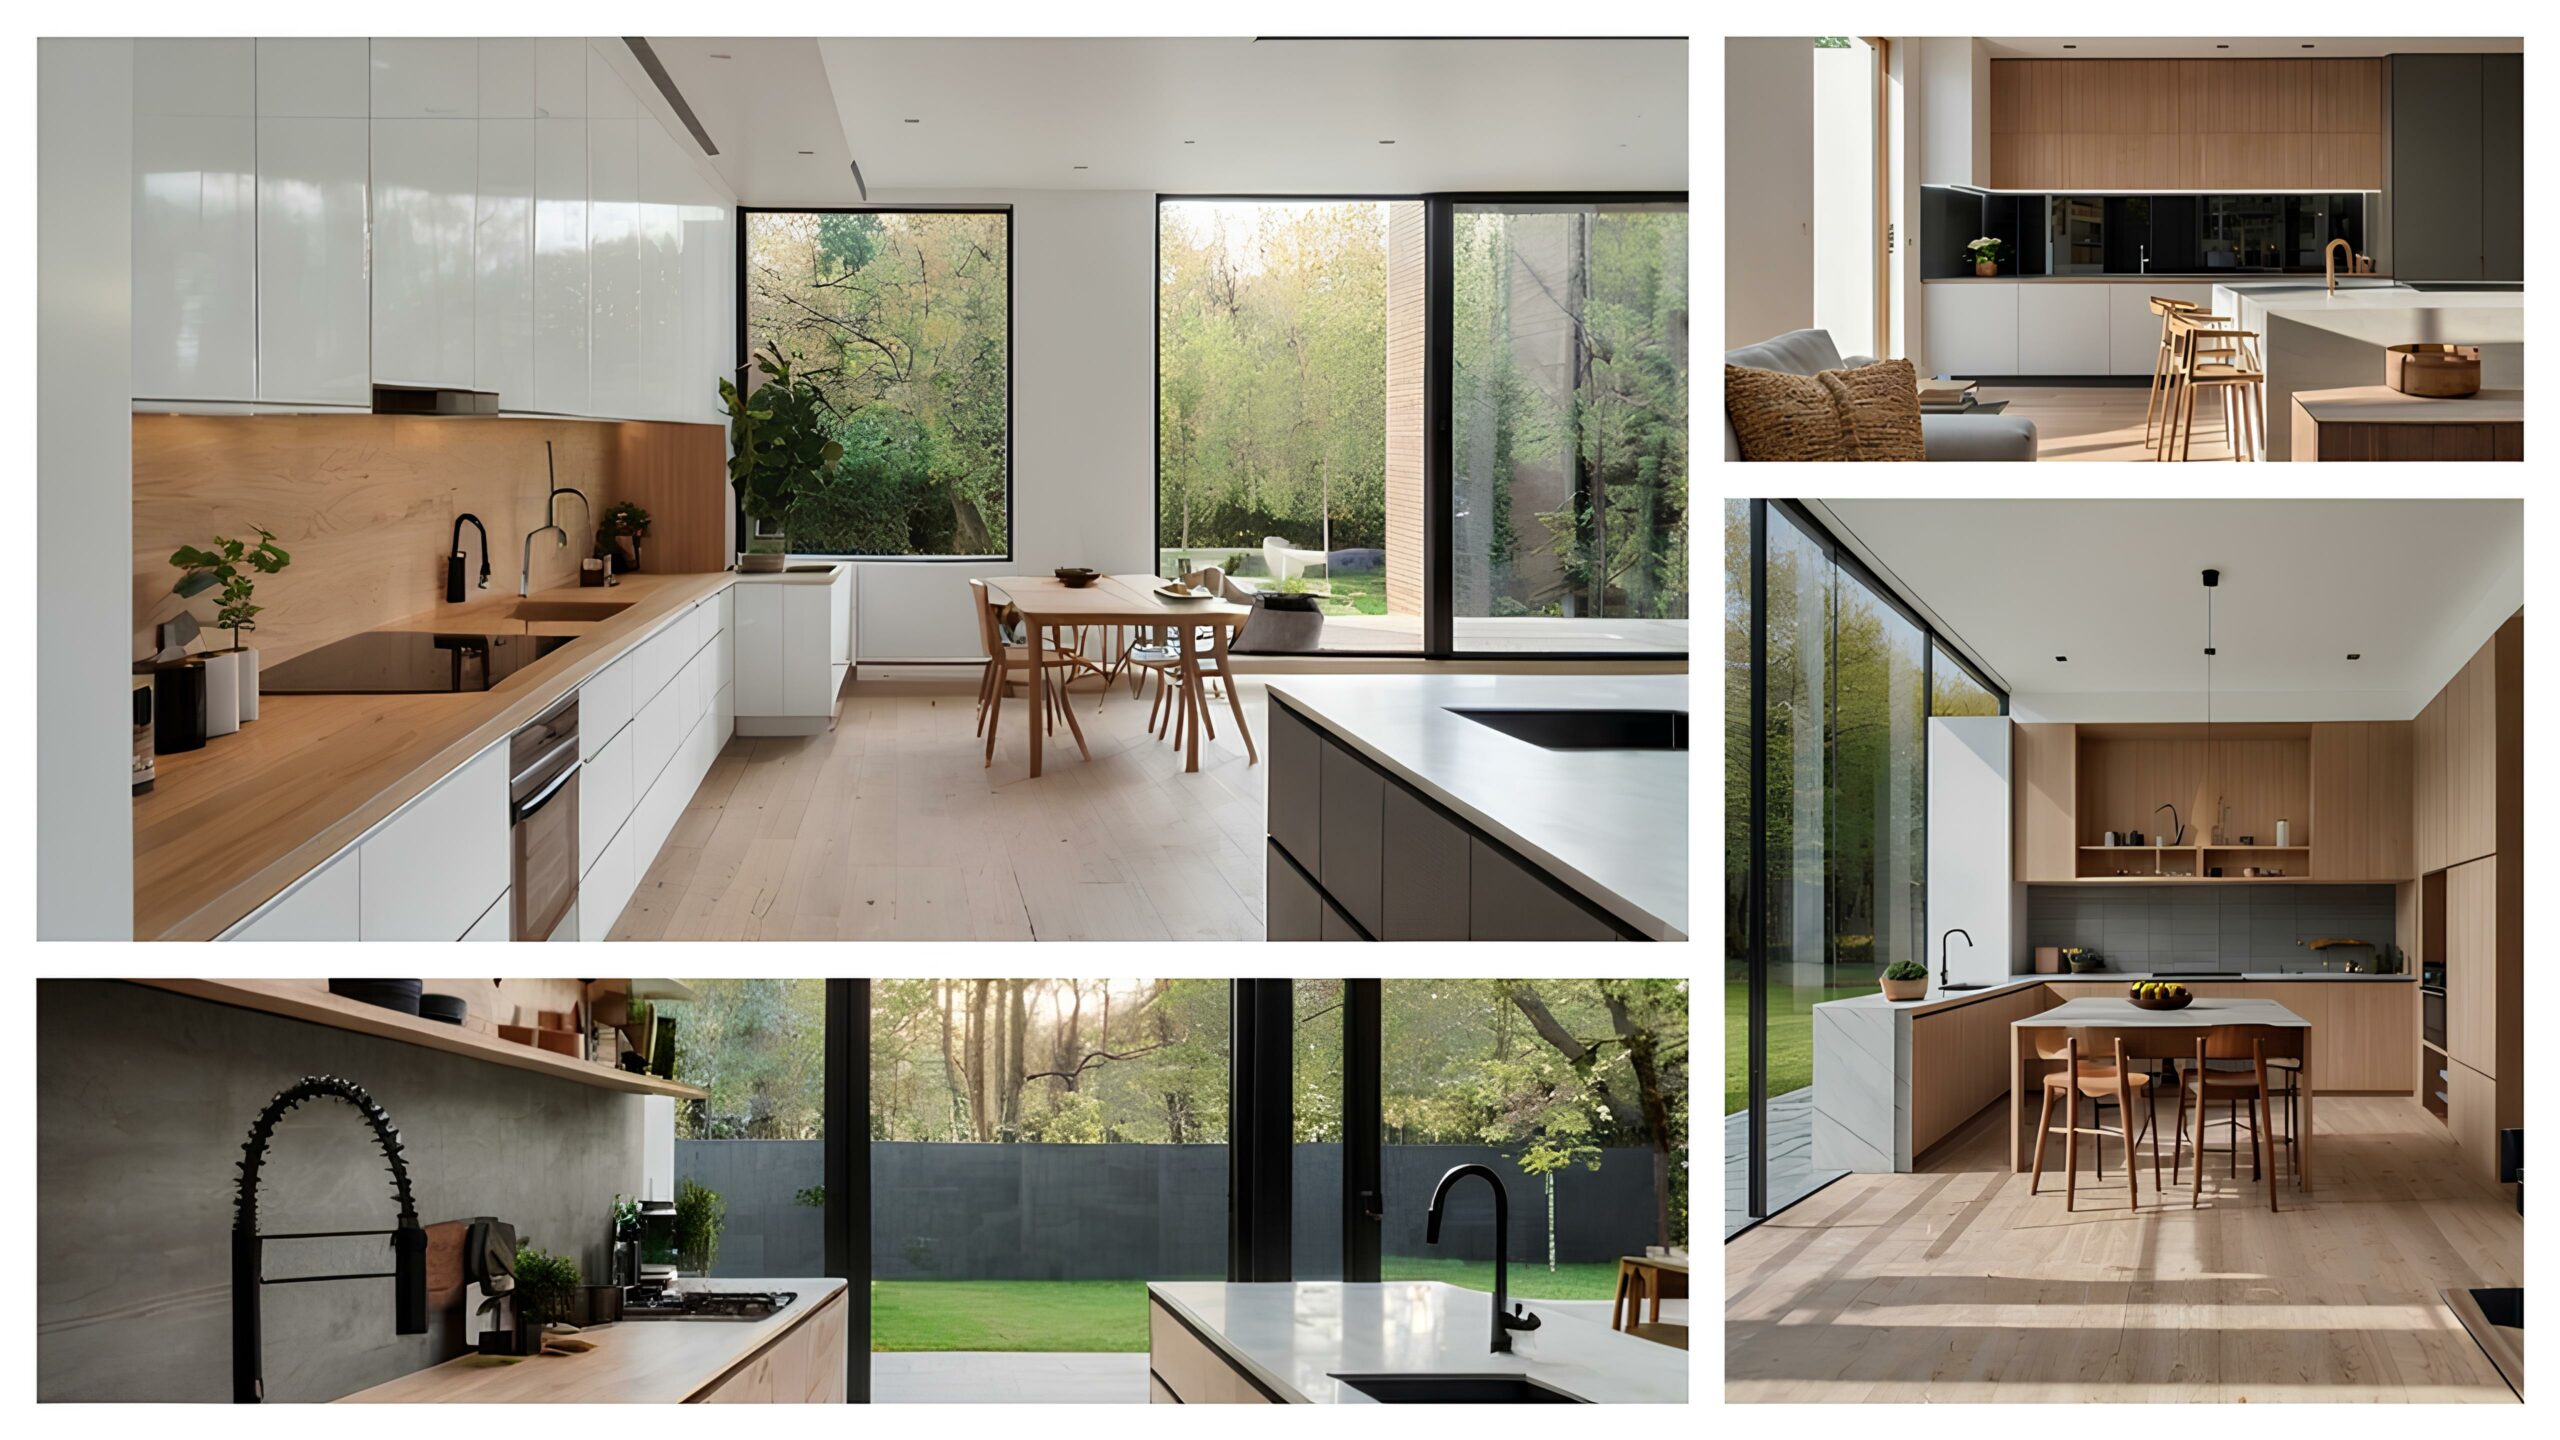 99 U-Shaped Kitchen: Ideal for Entertaining and Family Meals